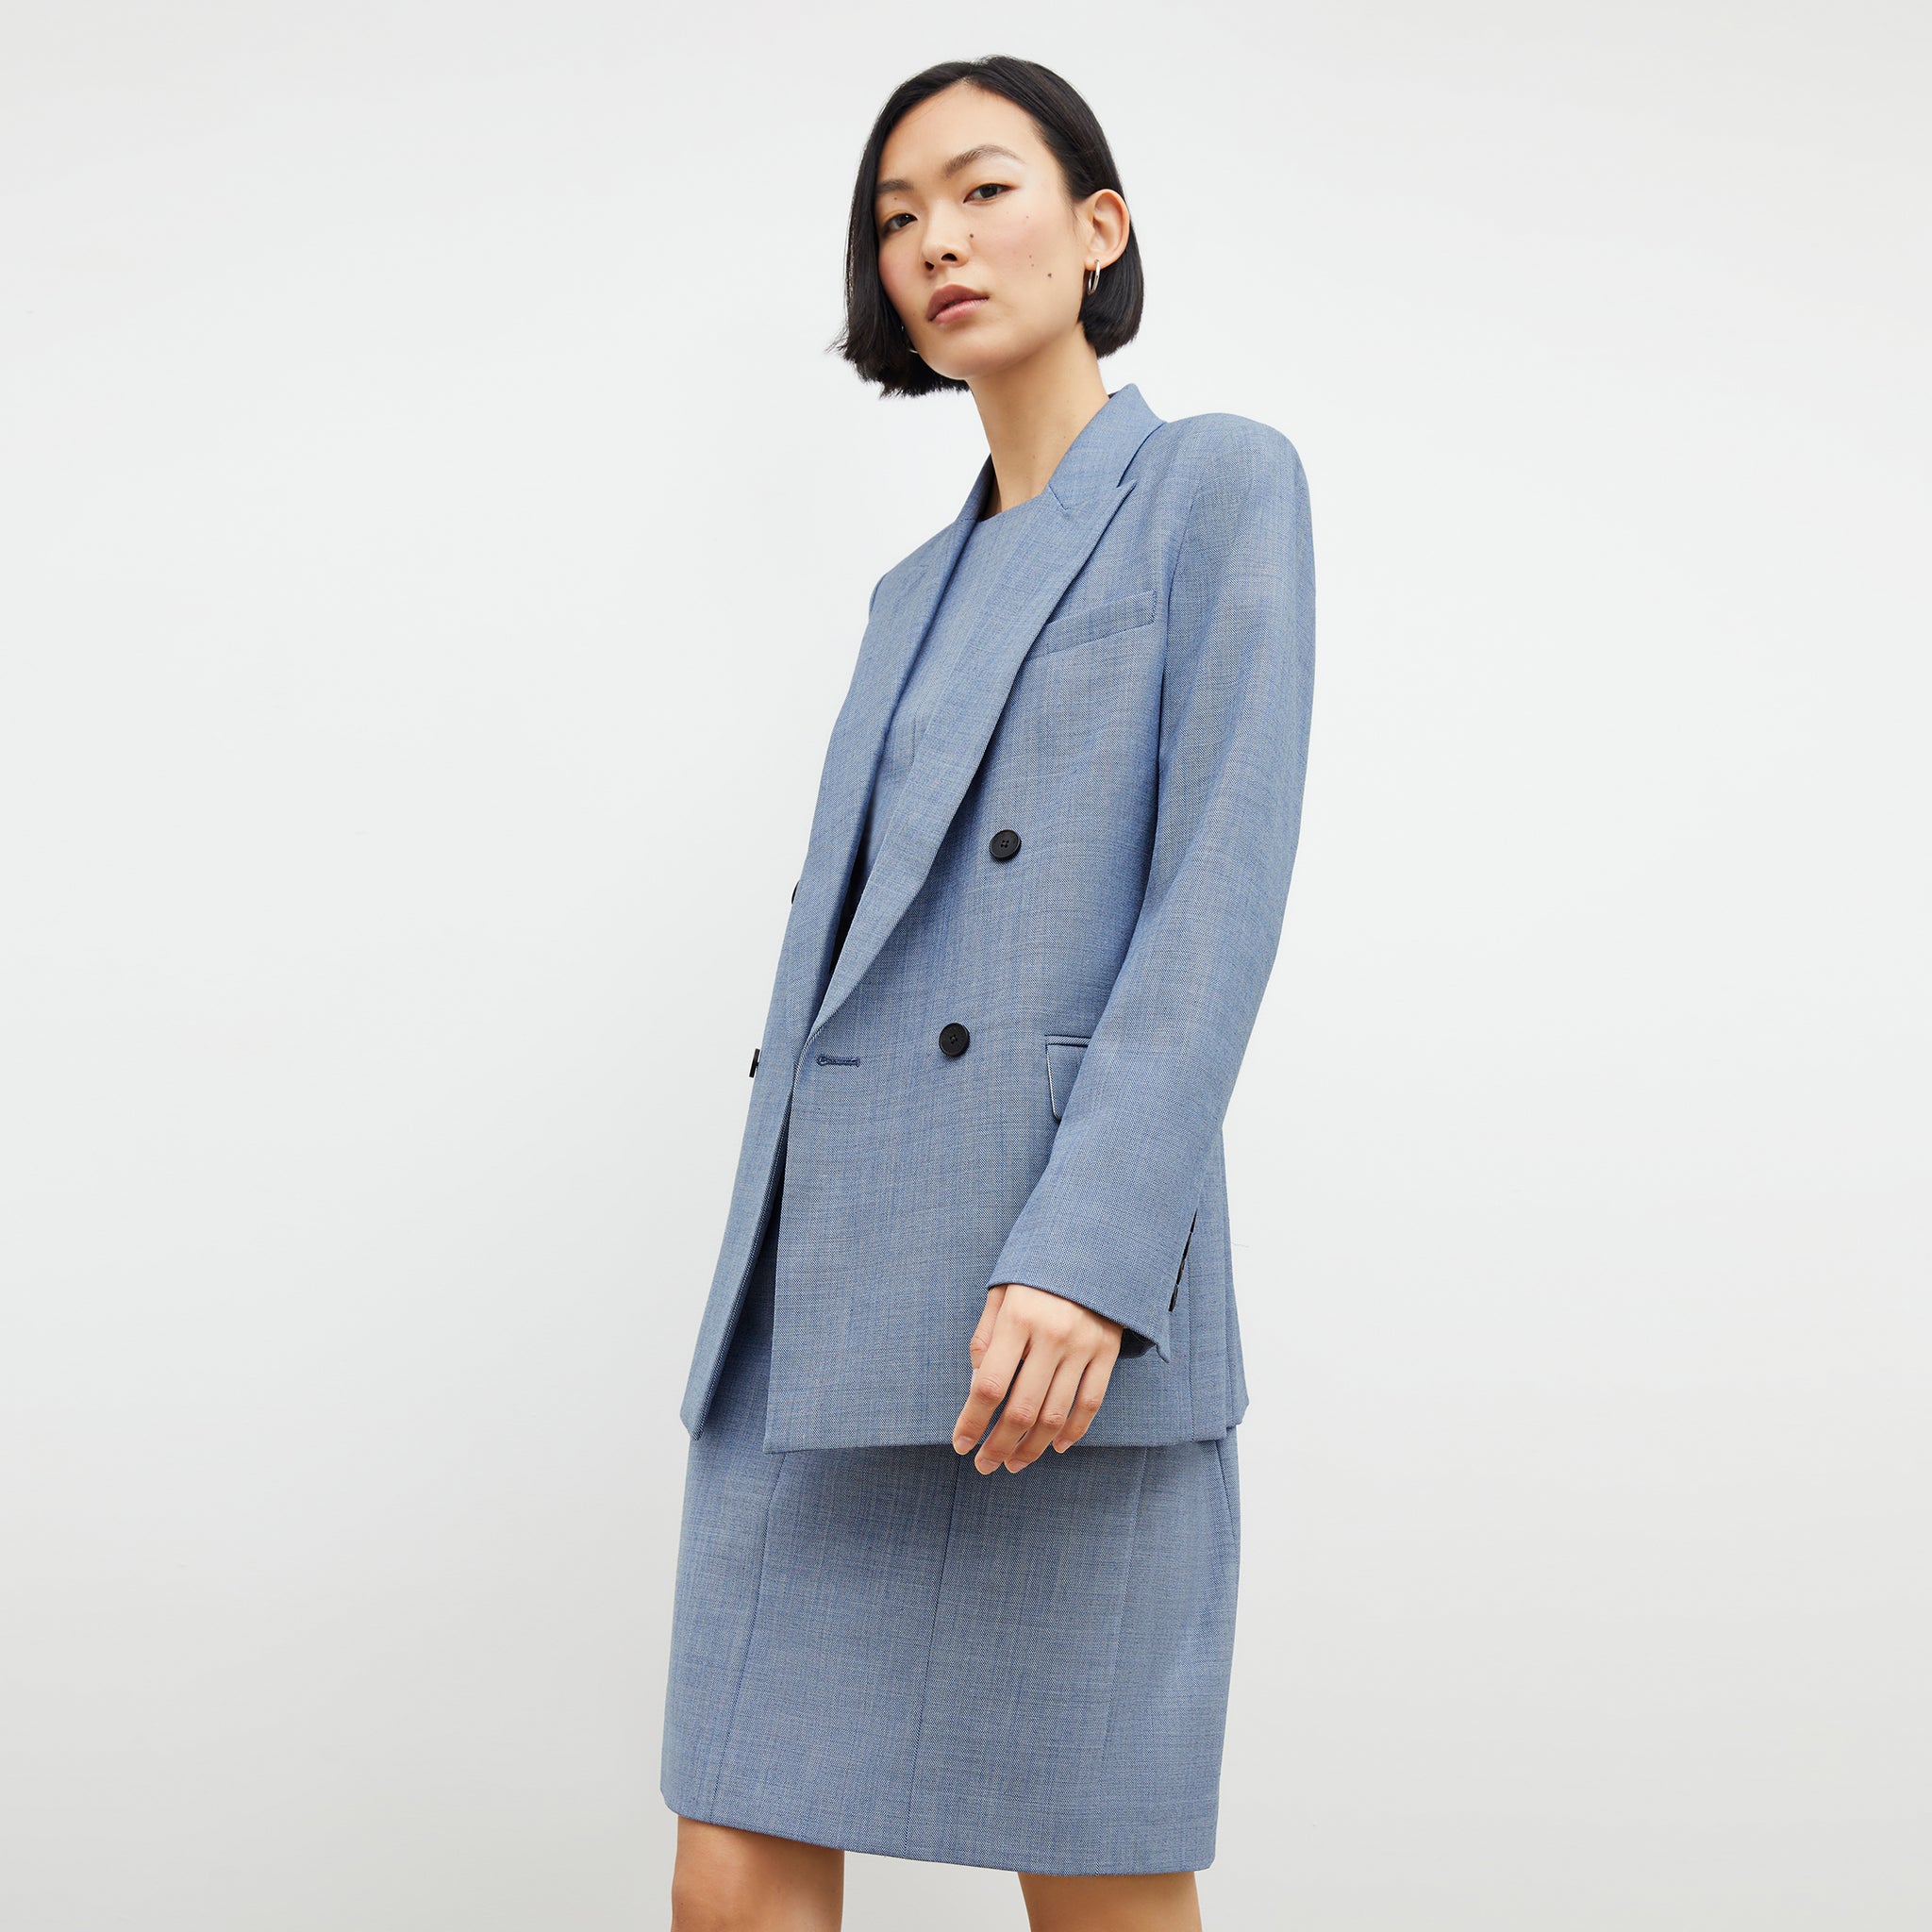 Front image of a woman wearing the constance dress in indigo and white